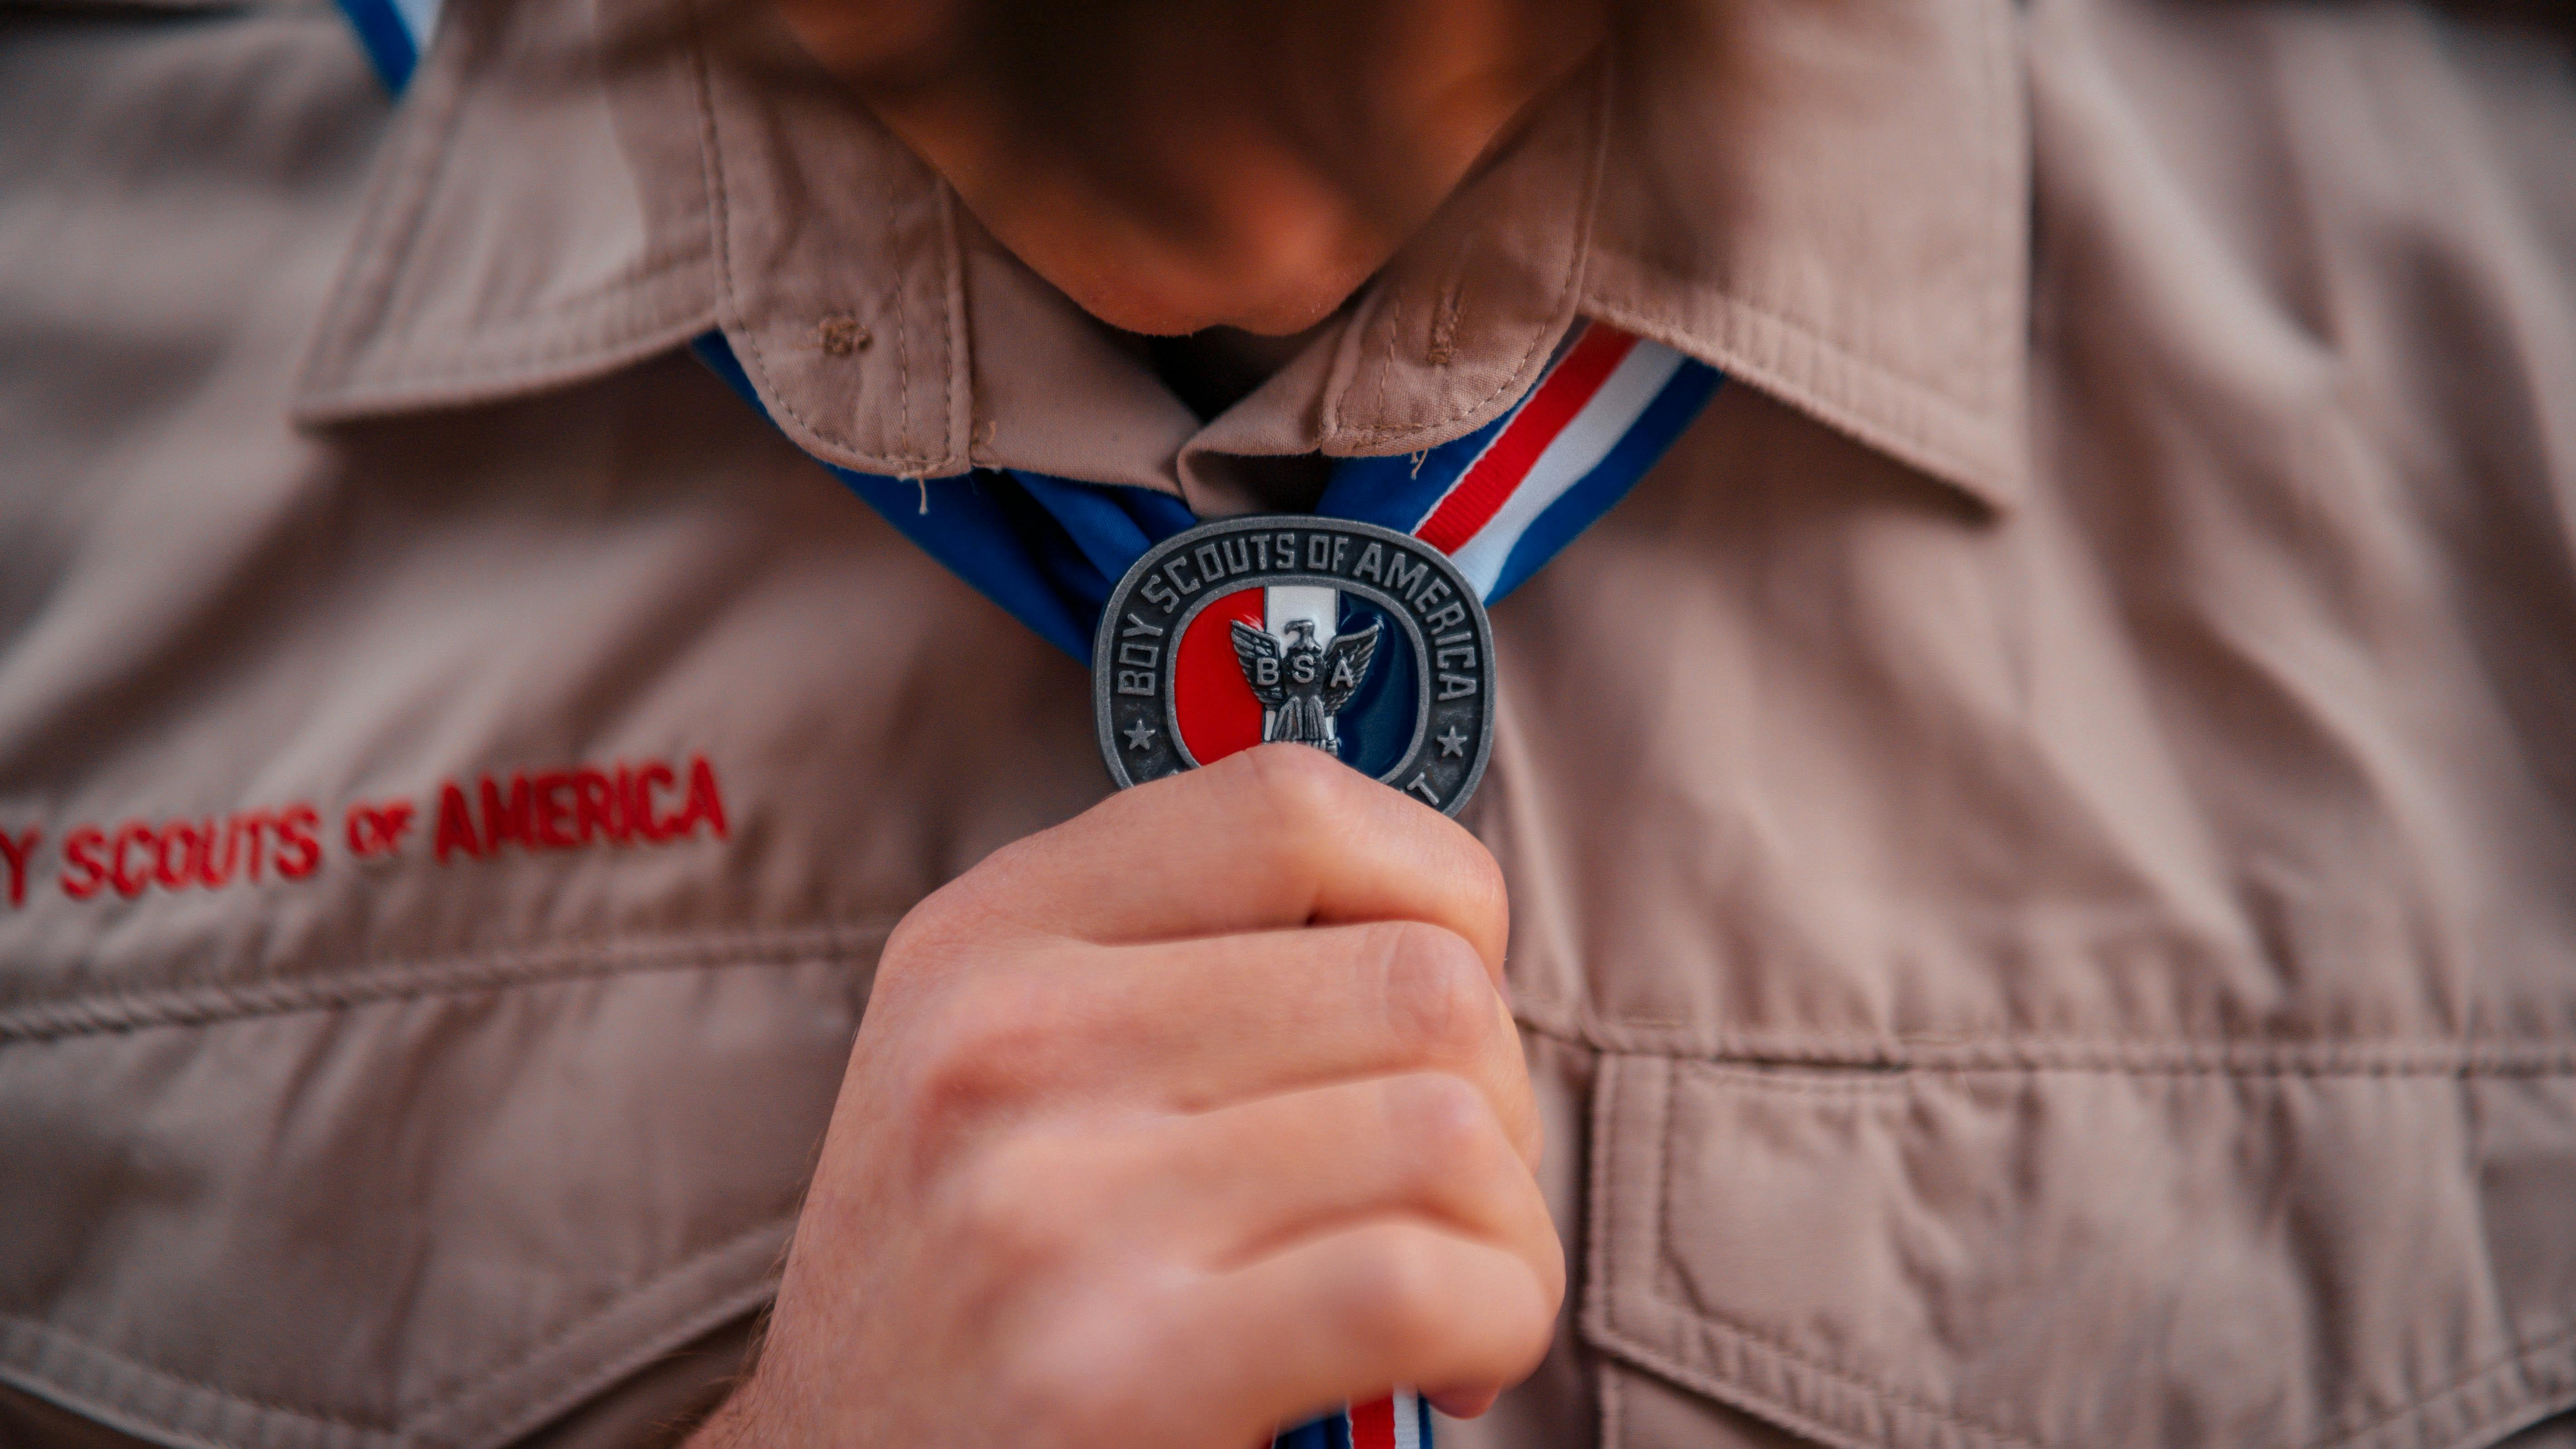 A boy scout holds his medal while wearing his boy scout shirt.